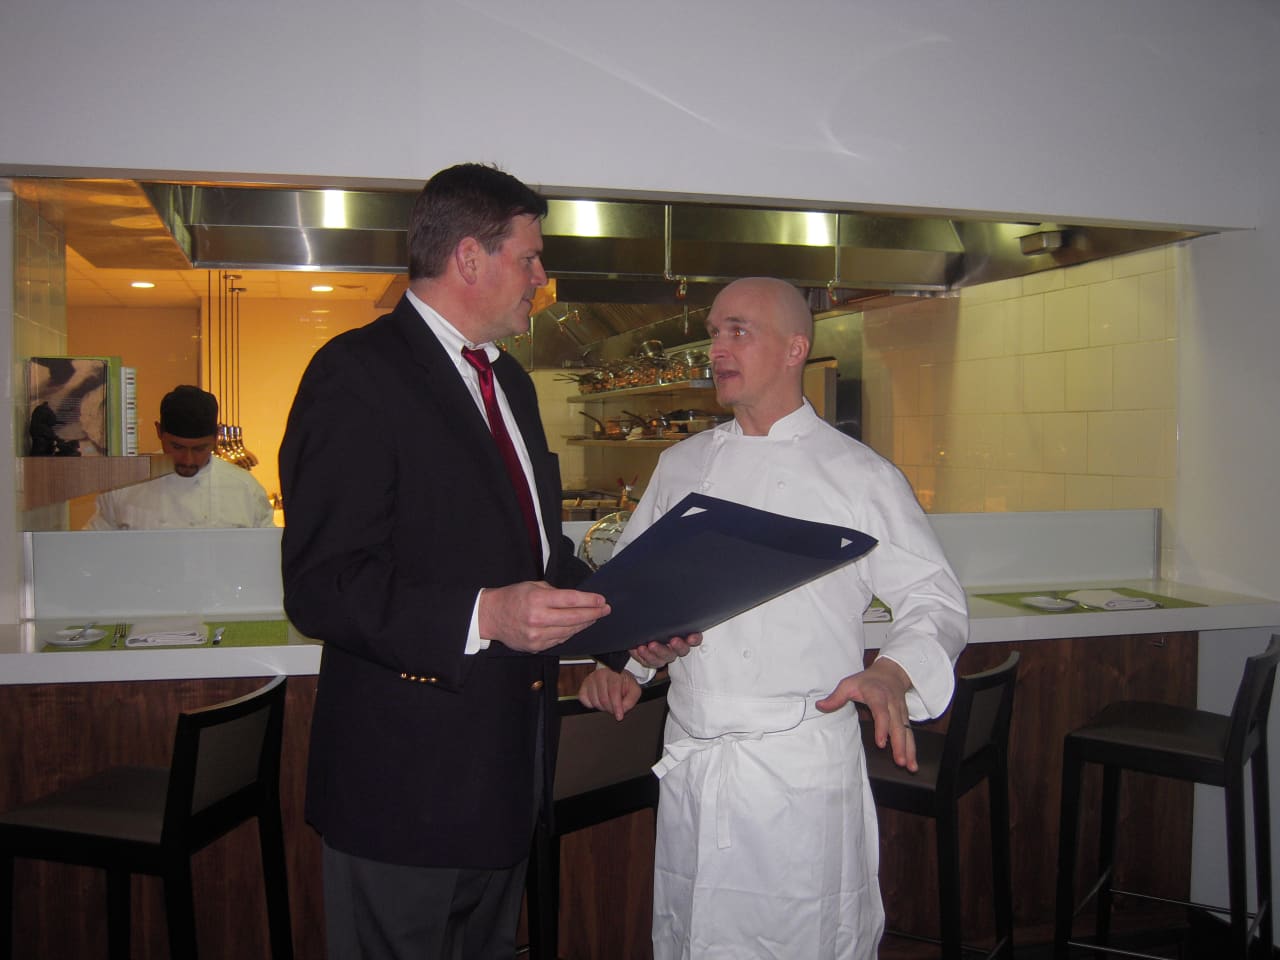 State Rep. Tom O'Dea, R-125, meets with Brian Lewis, owner and chef at Elm Restaurant in New Canaan, to celebrate his first anniversary in business. 